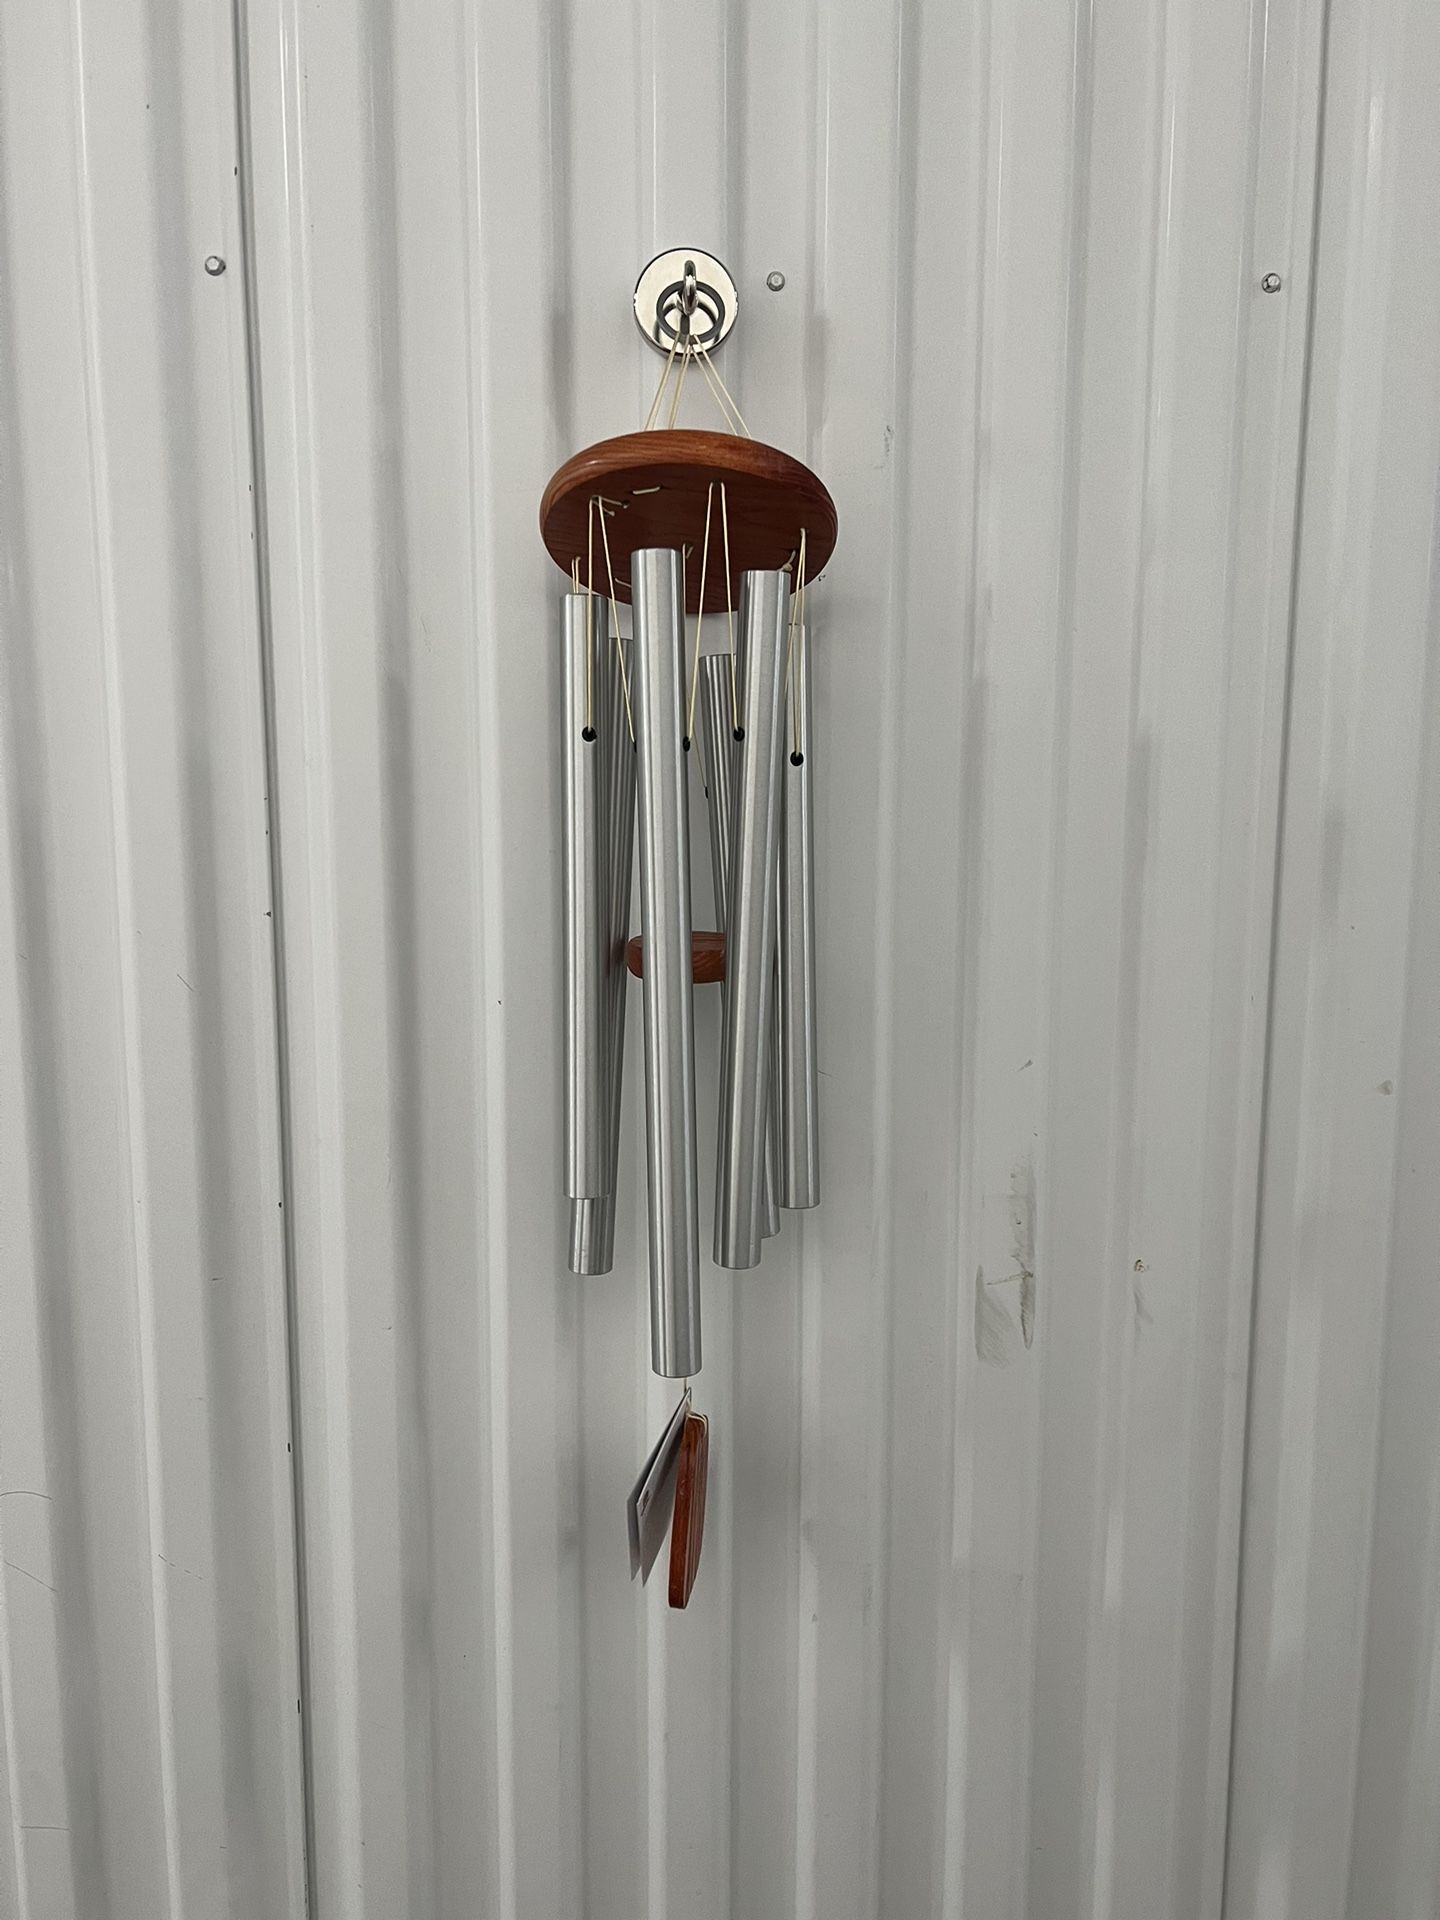 Woodstock Wind Chimes Original Amazing Grace Chime, Wind Chimes for Outside, Outdoor Decor for Your Patio, Porch, and Garden, Memorial and Sympathy Ch